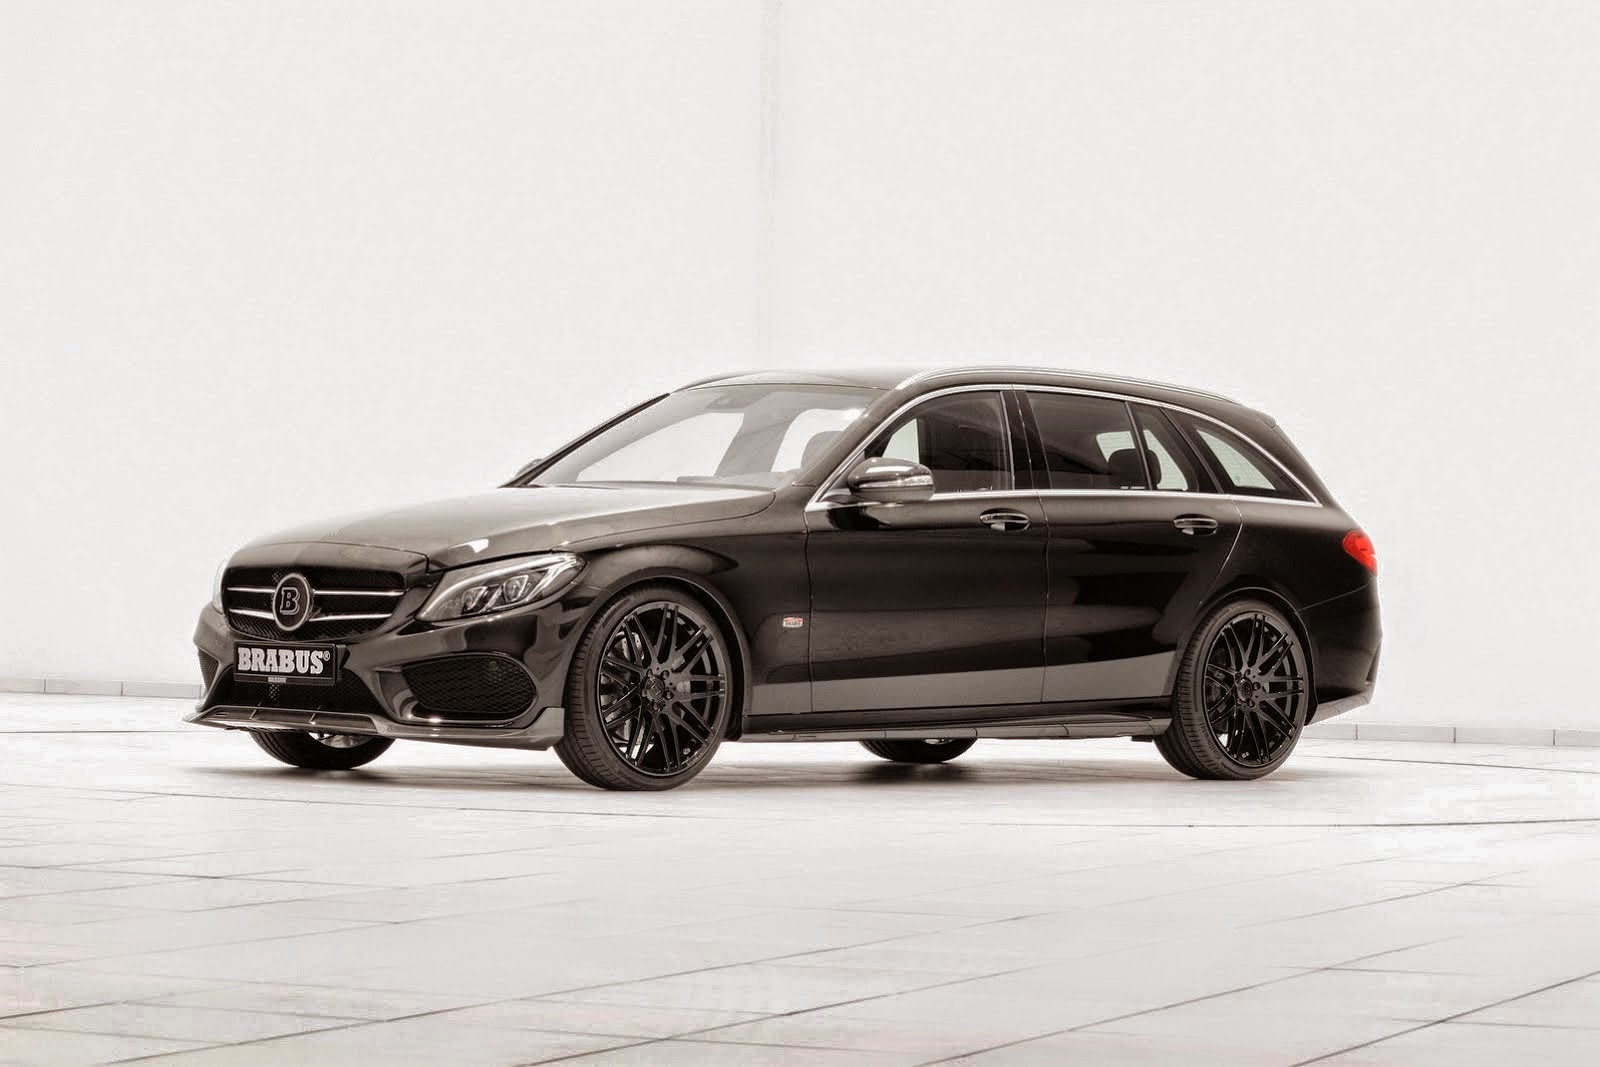 2015, Vath, V18, Mercedes, Benz, S205, Stationwagon, Tuning Wallpapers ...